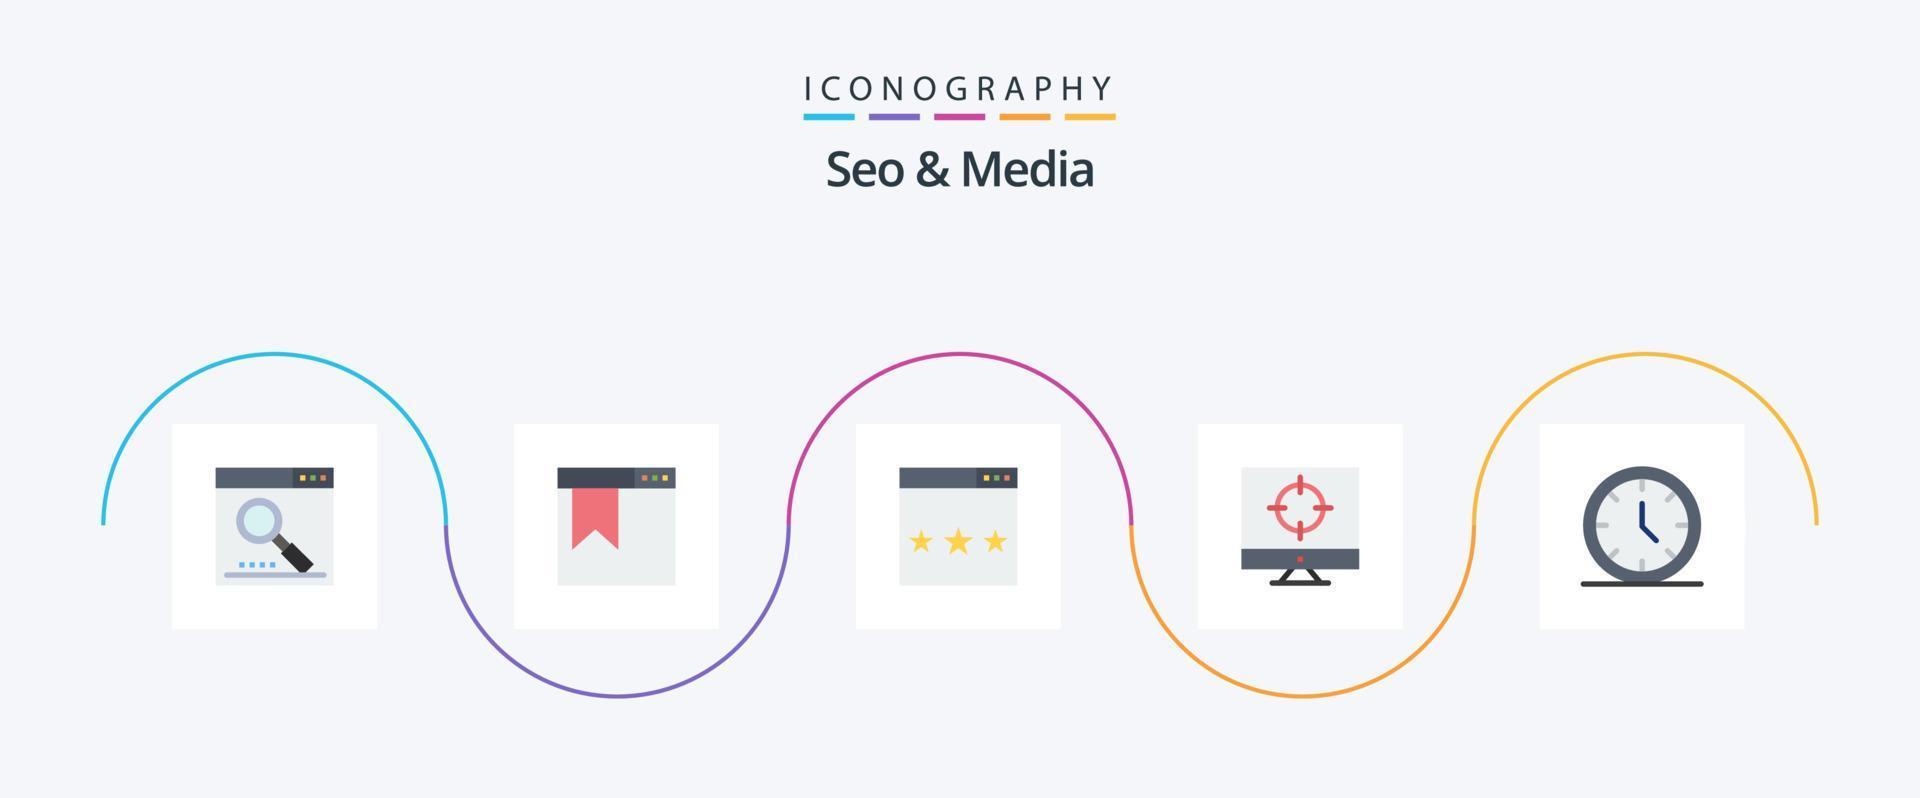 Seo and Media Flat 5 Icon Pack Including targeting. seo. website. business. ranking vector